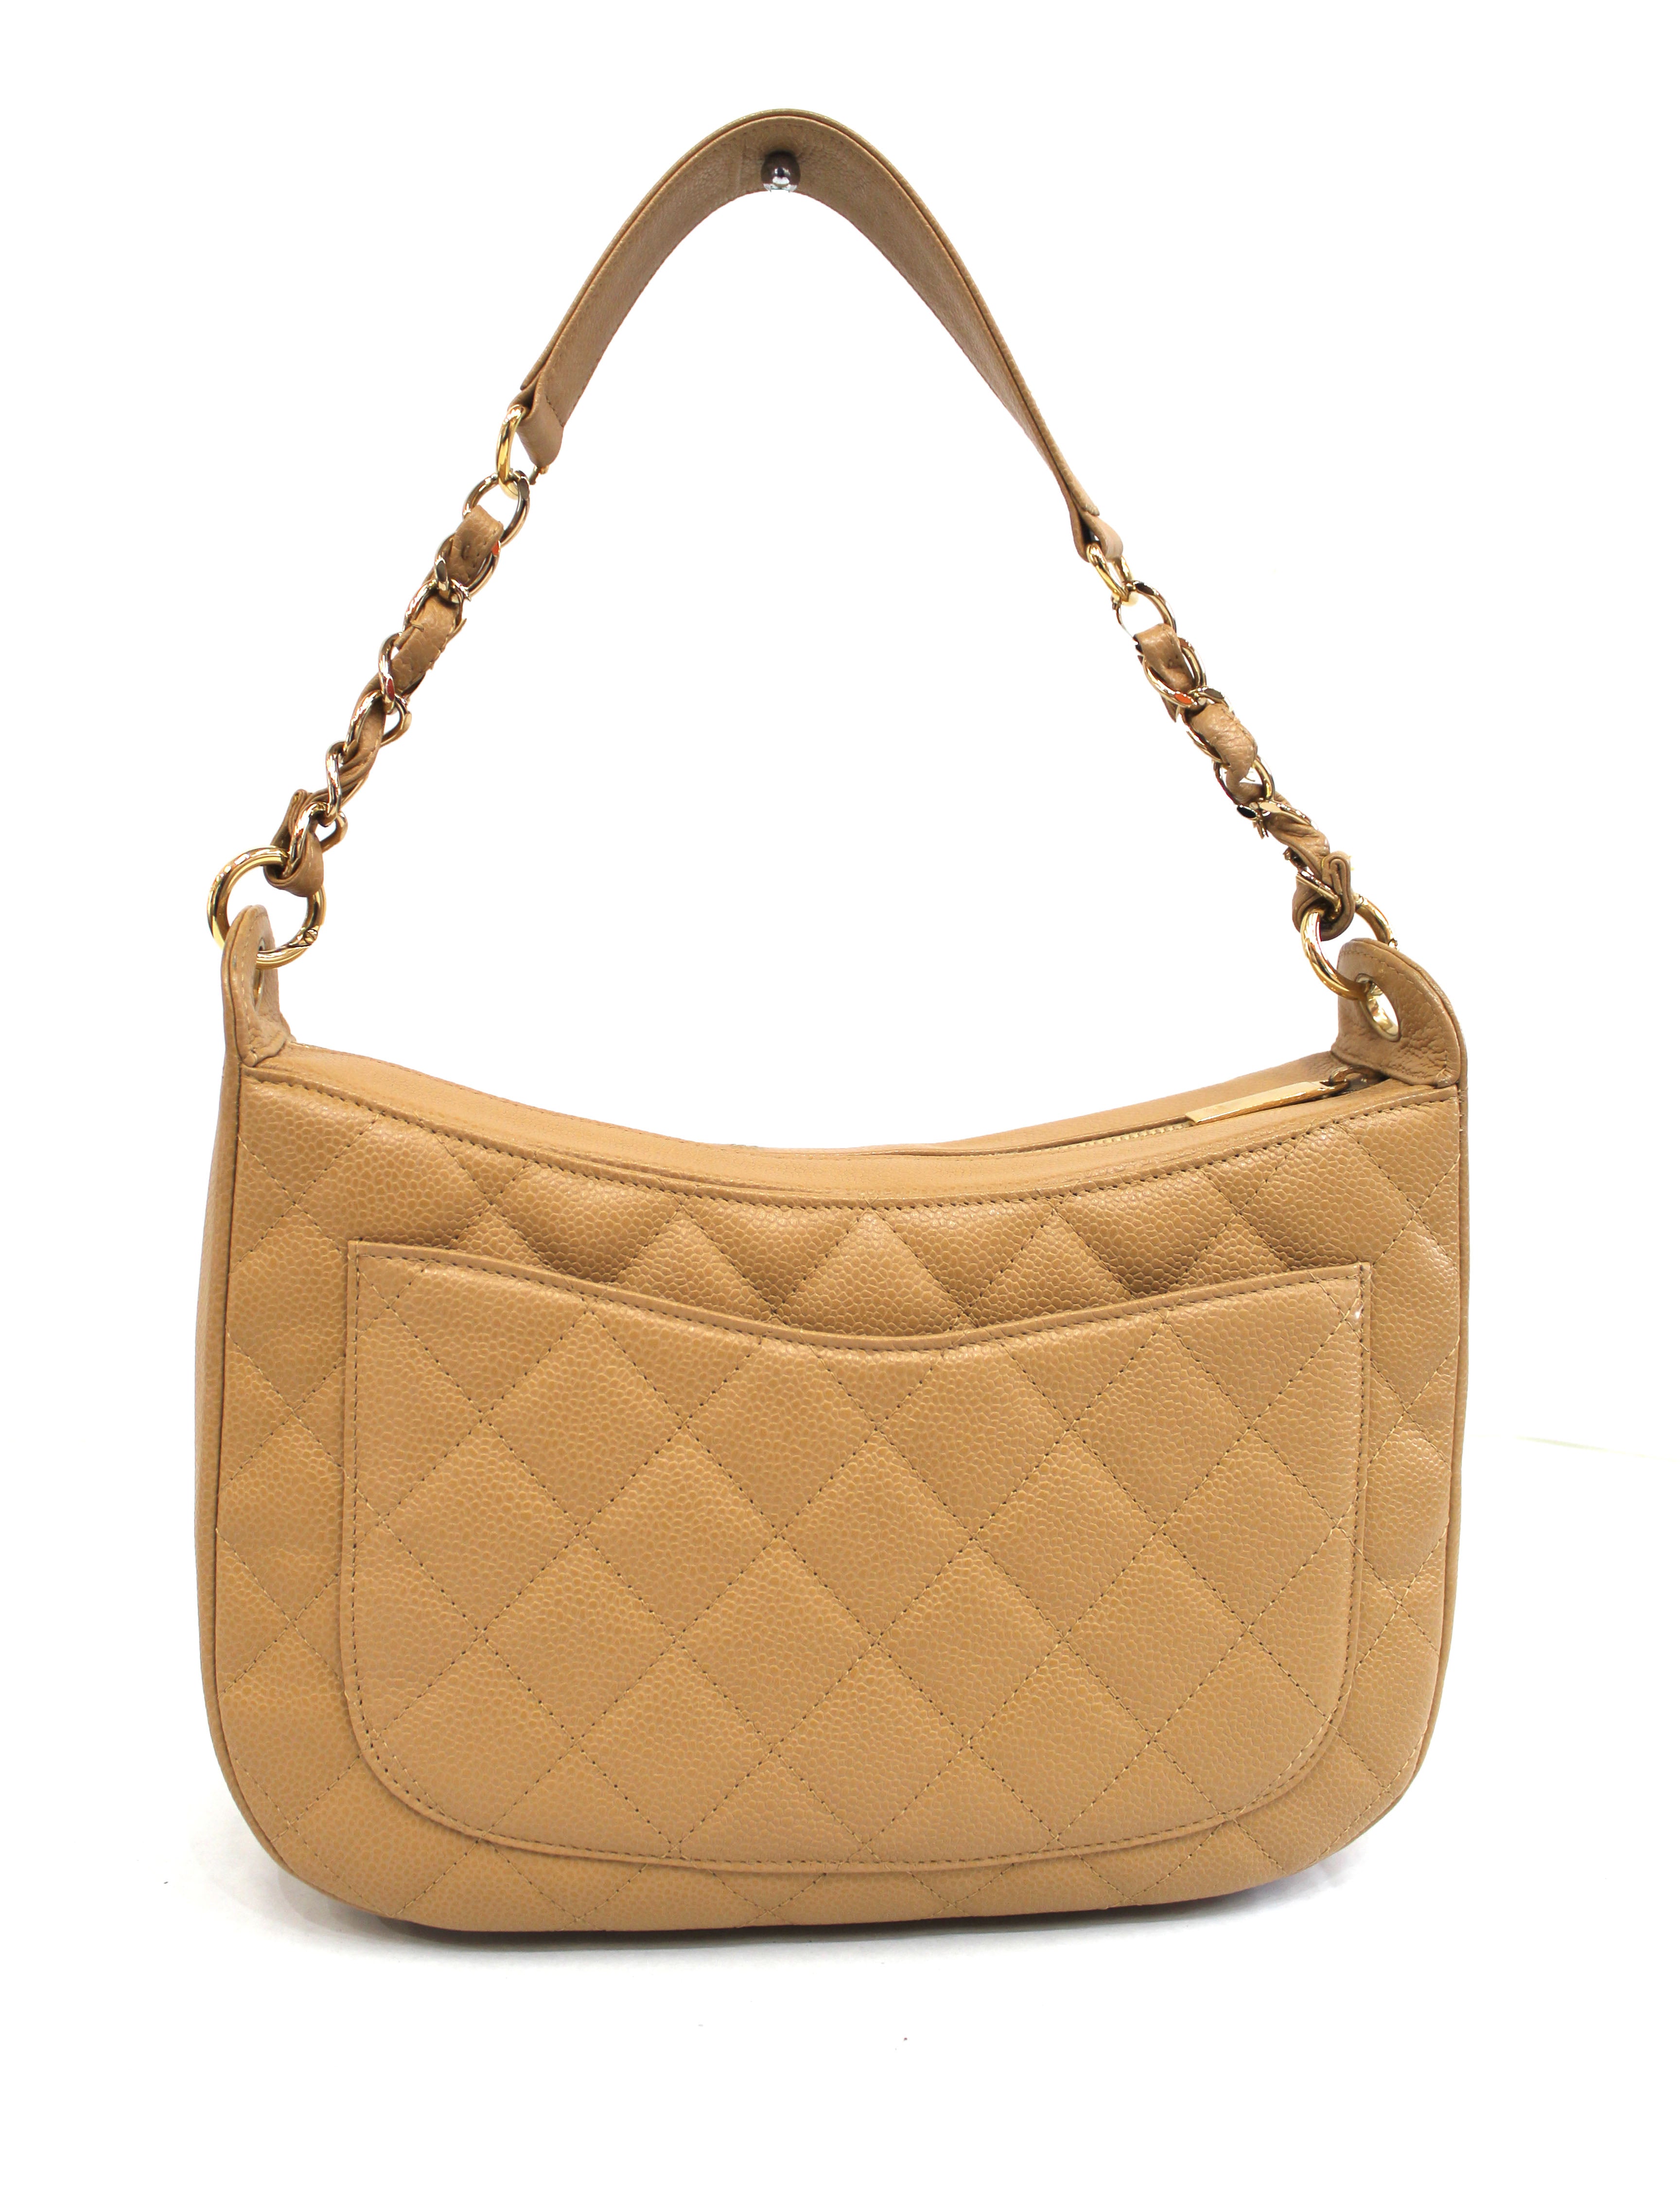 Chanel Caviar Beige Quilted Vintage Square Classic Flap Bag